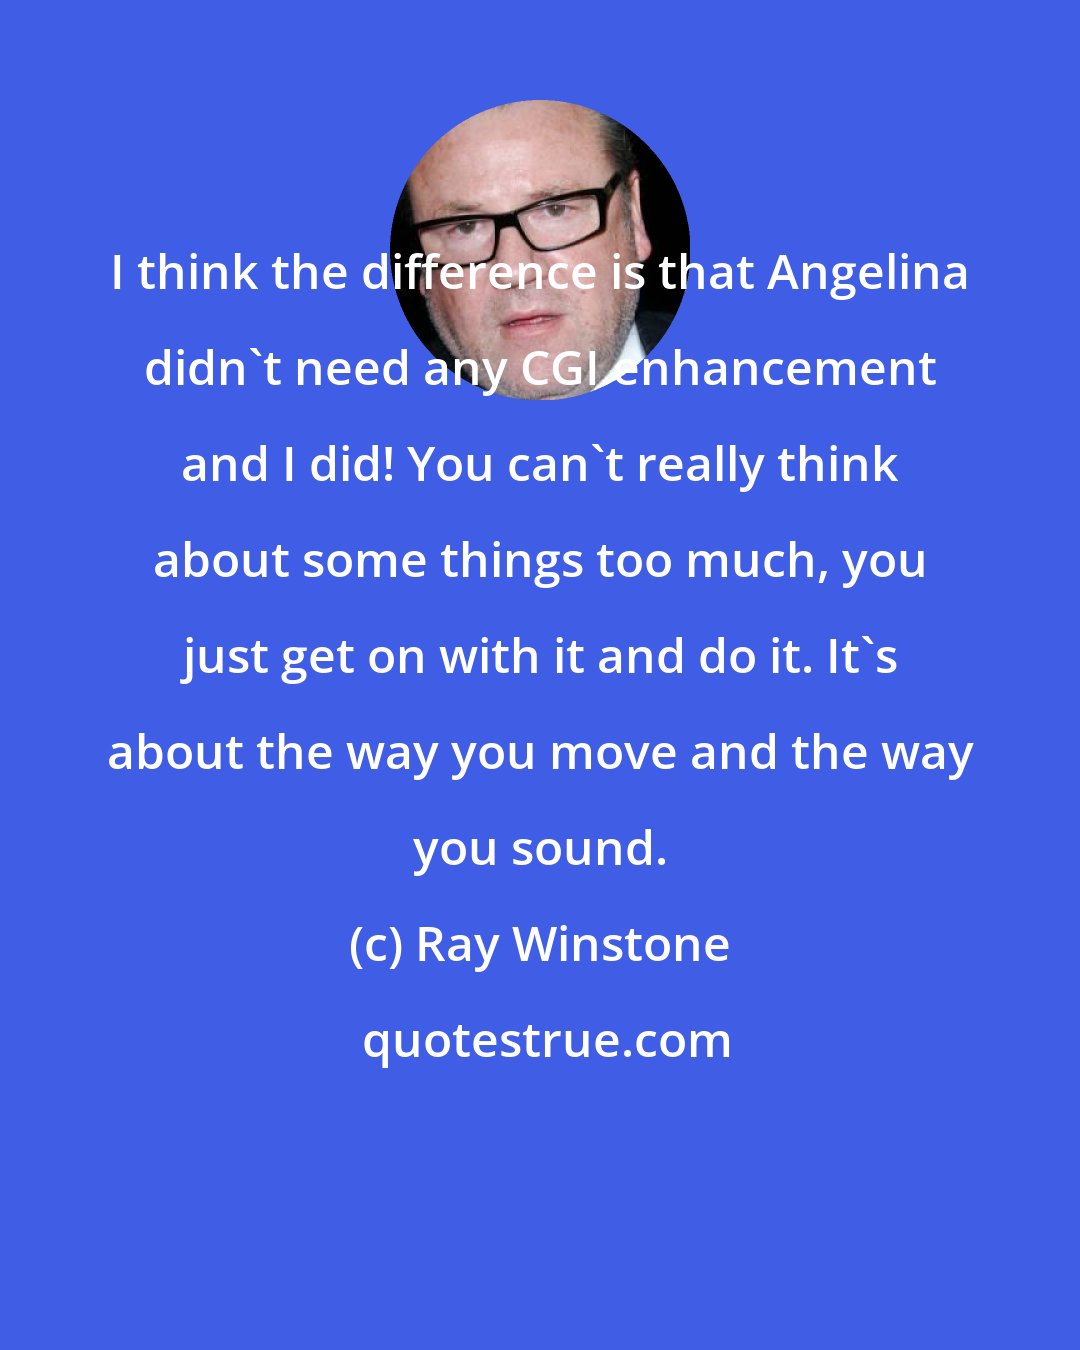 Ray Winstone: I think the difference is that Angelina didn't need any CGI enhancement and I did! You can't really think about some things too much, you just get on with it and do it. It's about the way you move and the way you sound.